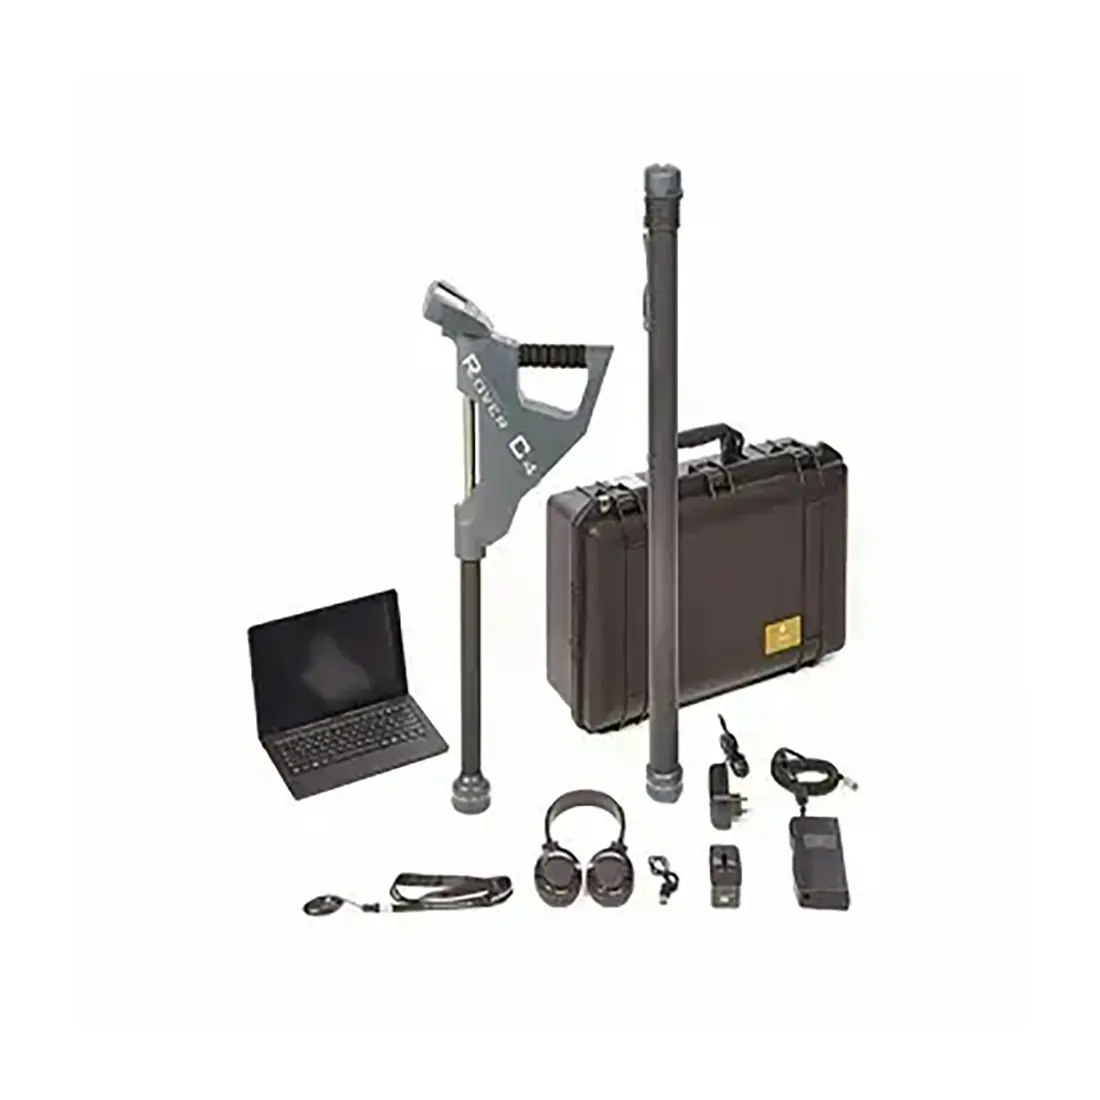 Okm Exp 6000 Pro Plus 3d Metal Detector And Ground Scanner With Video IN STOCK